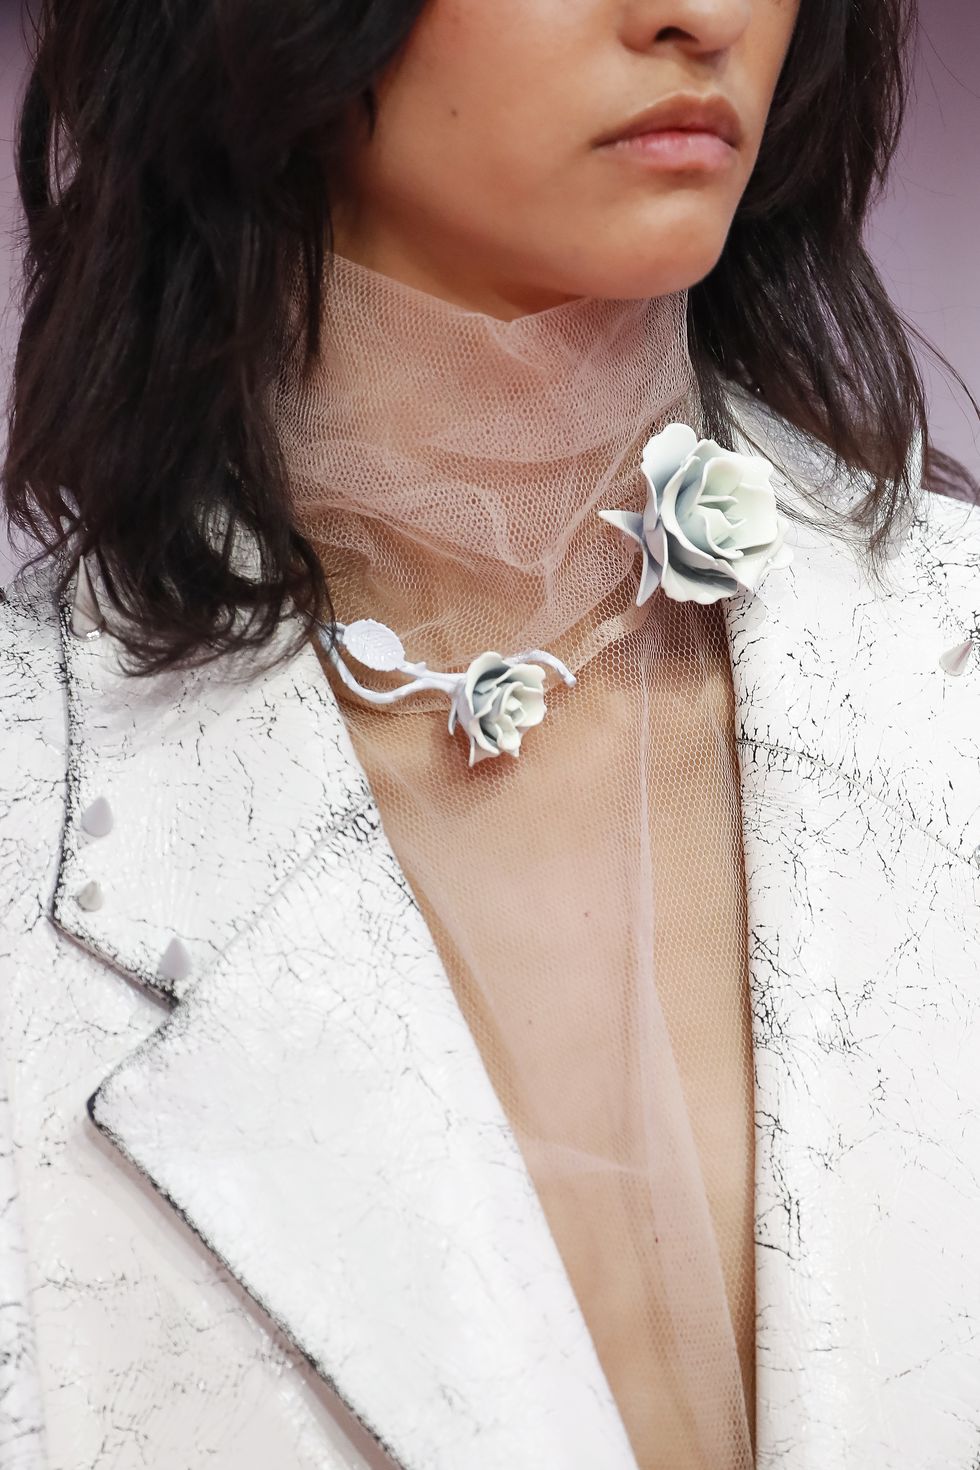 Fashion Jewelry Trends That Will Dominate Spring 2023